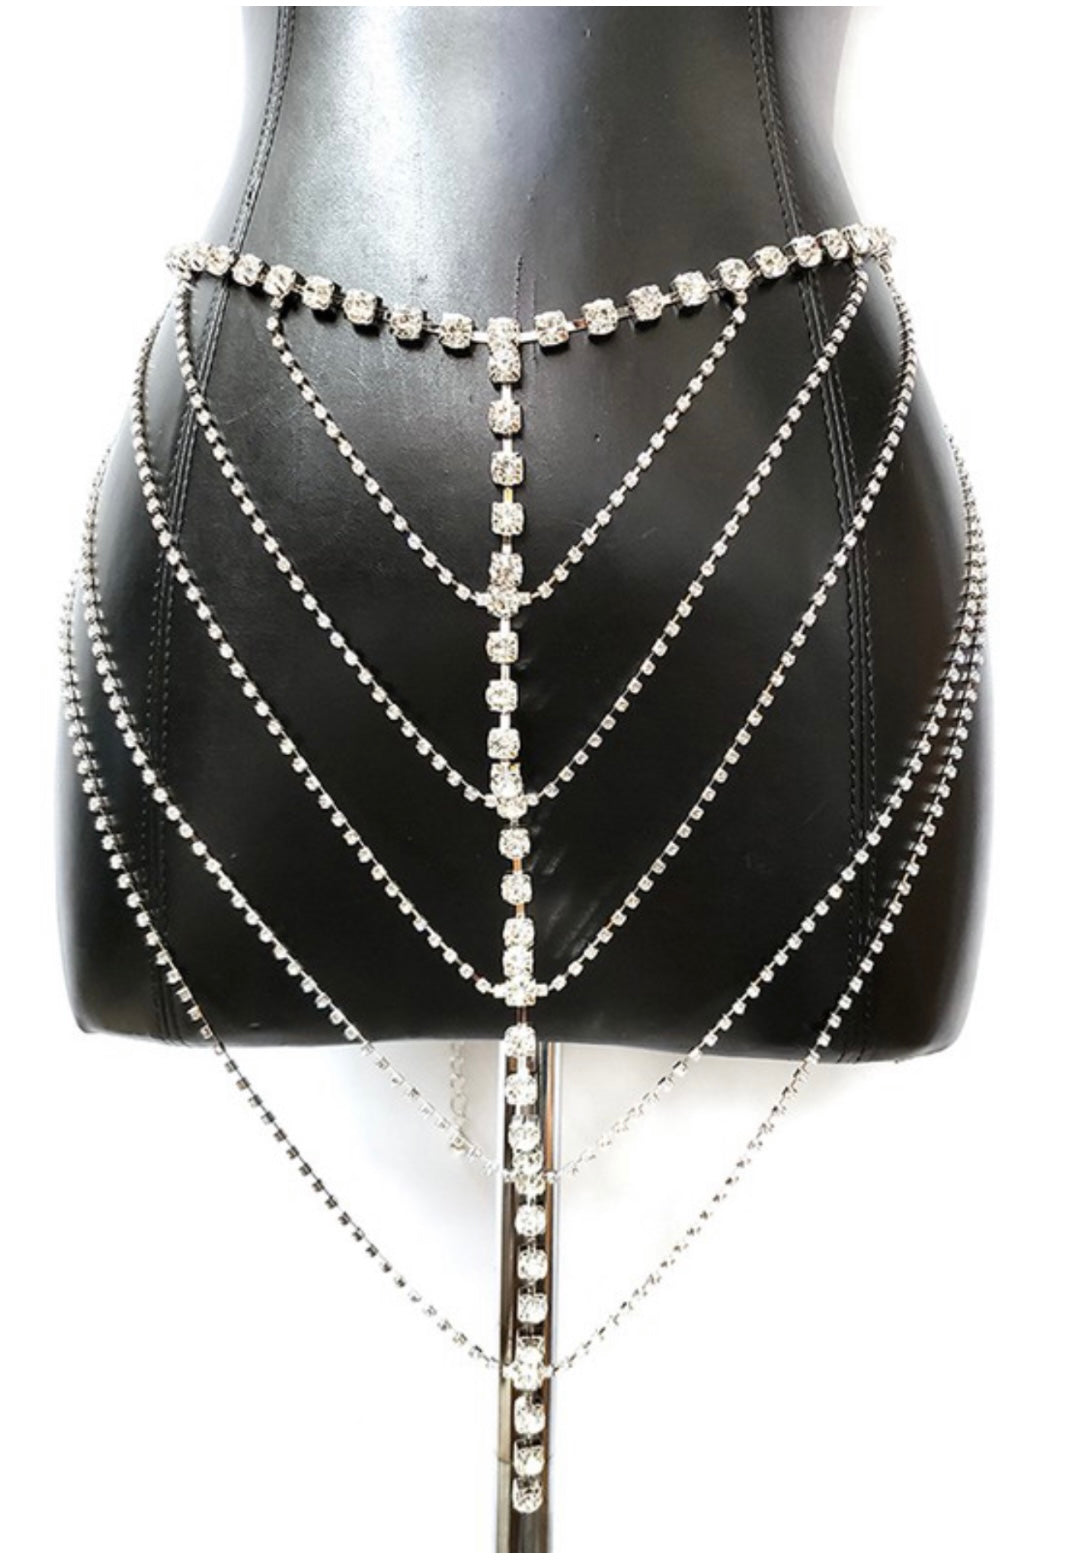 Chained Stone Body Chain Belt with Dangling Chain Trim, XY4201